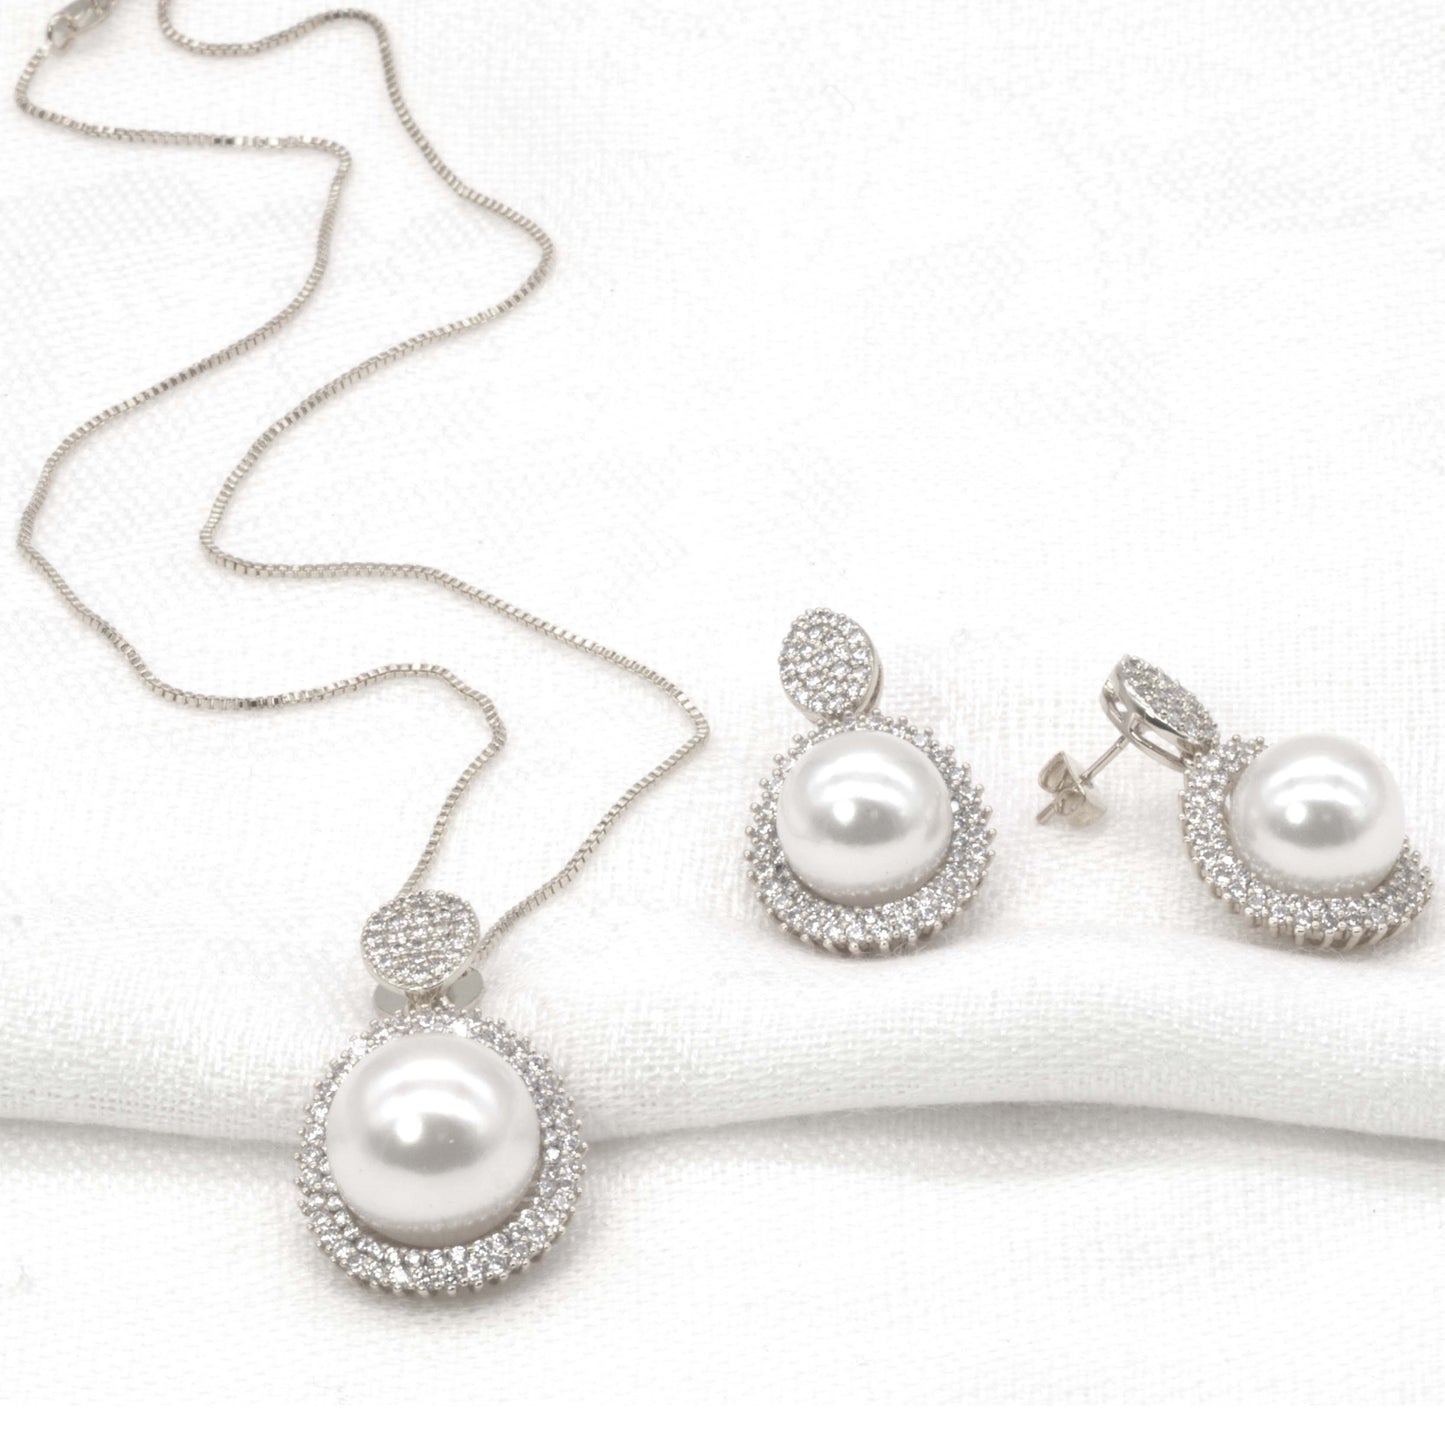 Pearl Pendant Necklace with AAA Cubic Zirconia, Rhodium Plated (Necklace Only)